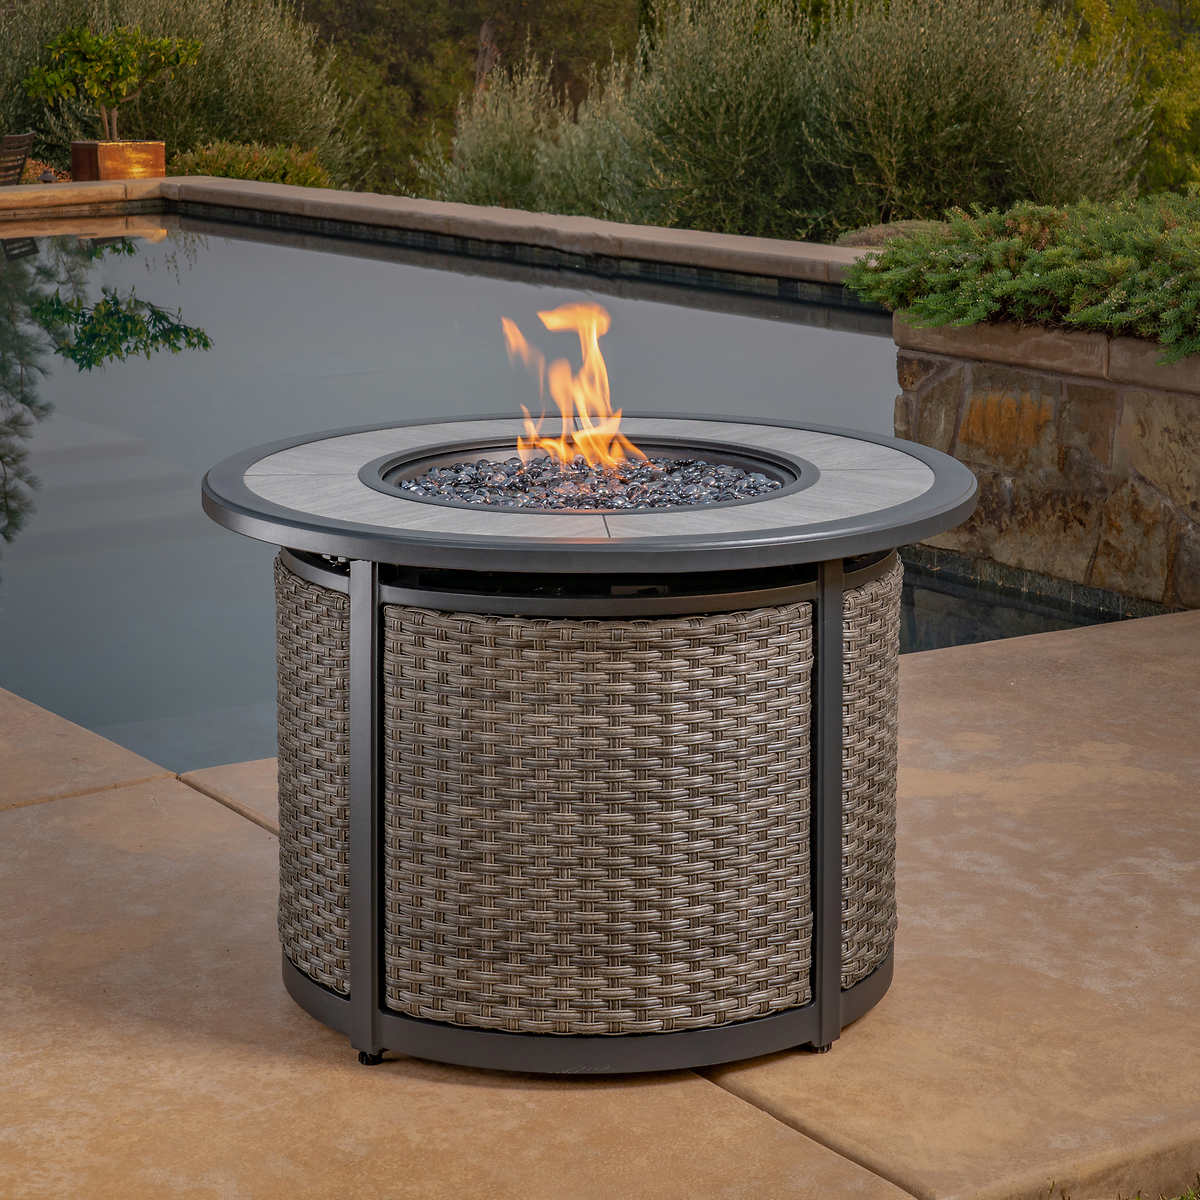 Madison Fire Pit Table Costco, Do Propane Fire Pits Need To Be Covered